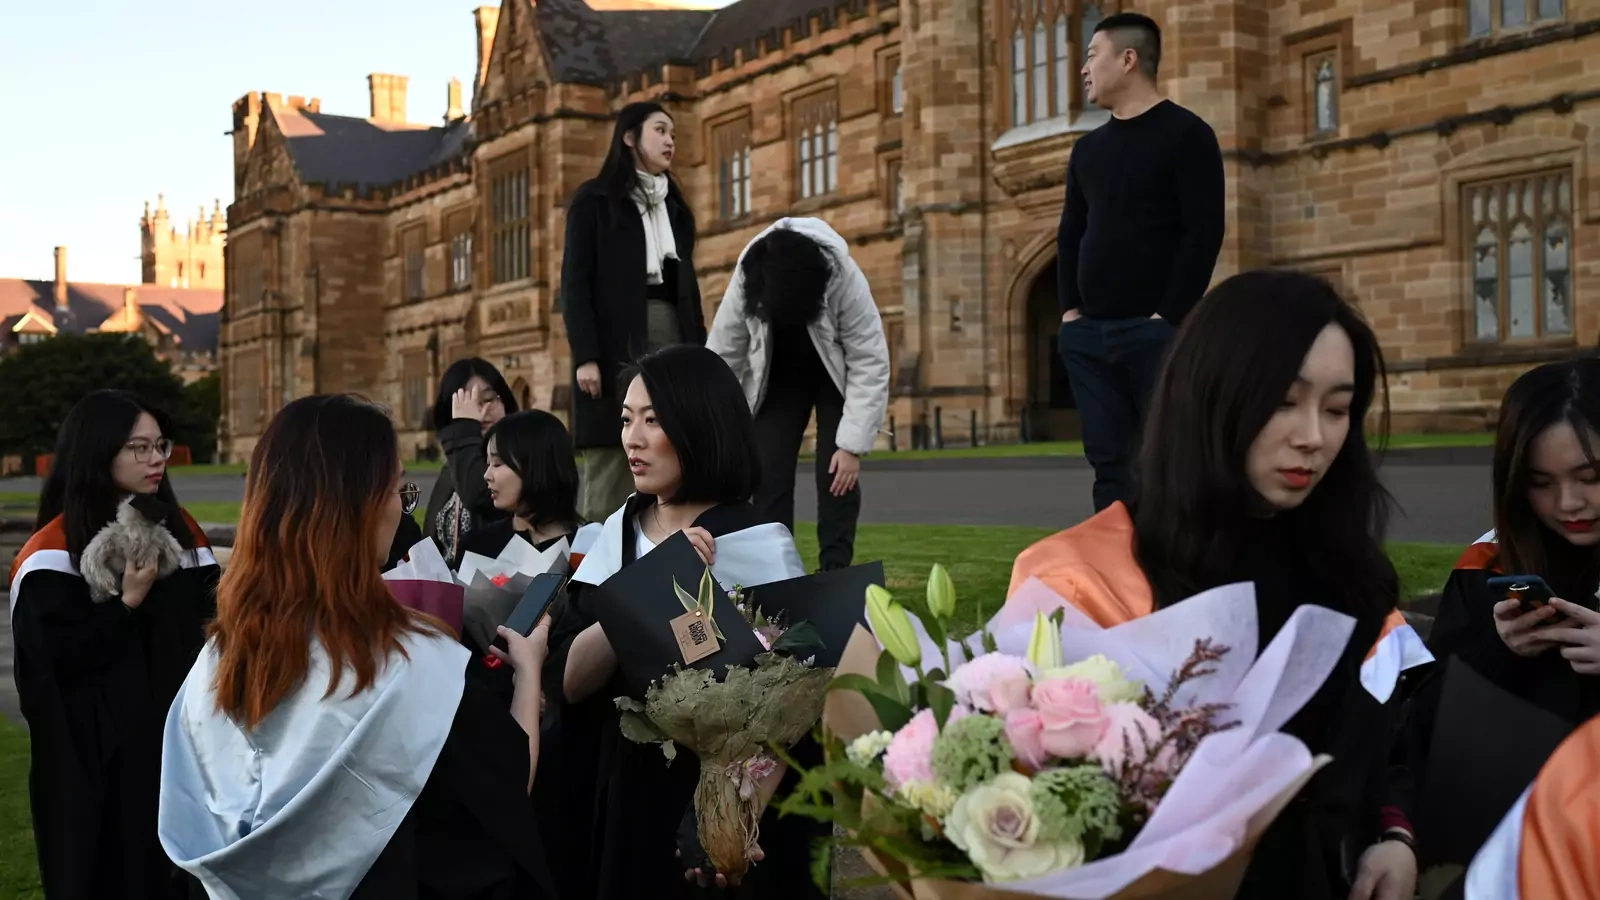 Shiyu Bao (center) and her fellow classmates, who are international students from China, get ready to take pictures in their graduation gowns around campus at the University of Sydney in Sydney, Australia, on July 4, 2020.